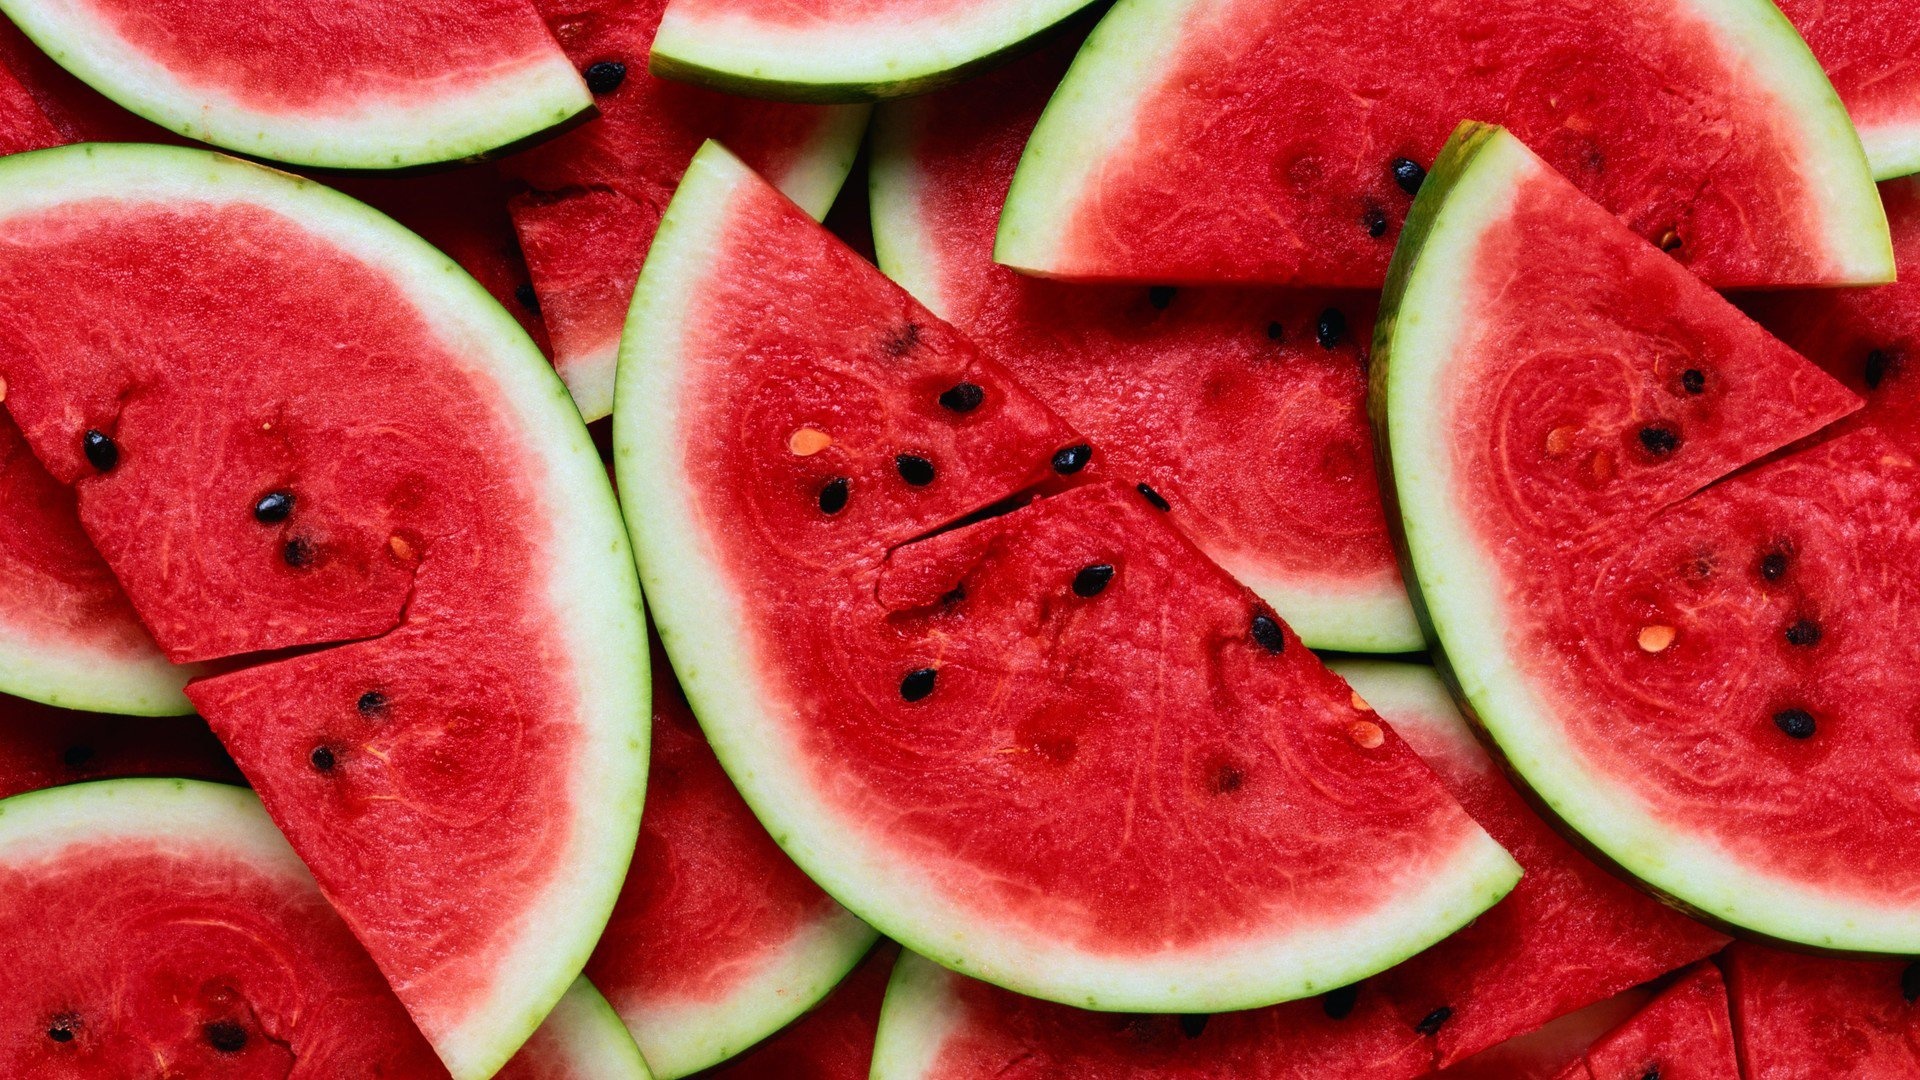 Watermelon: A hydrating fruit that is healthy for most people. 1920x1080 Full HD Wallpaper.